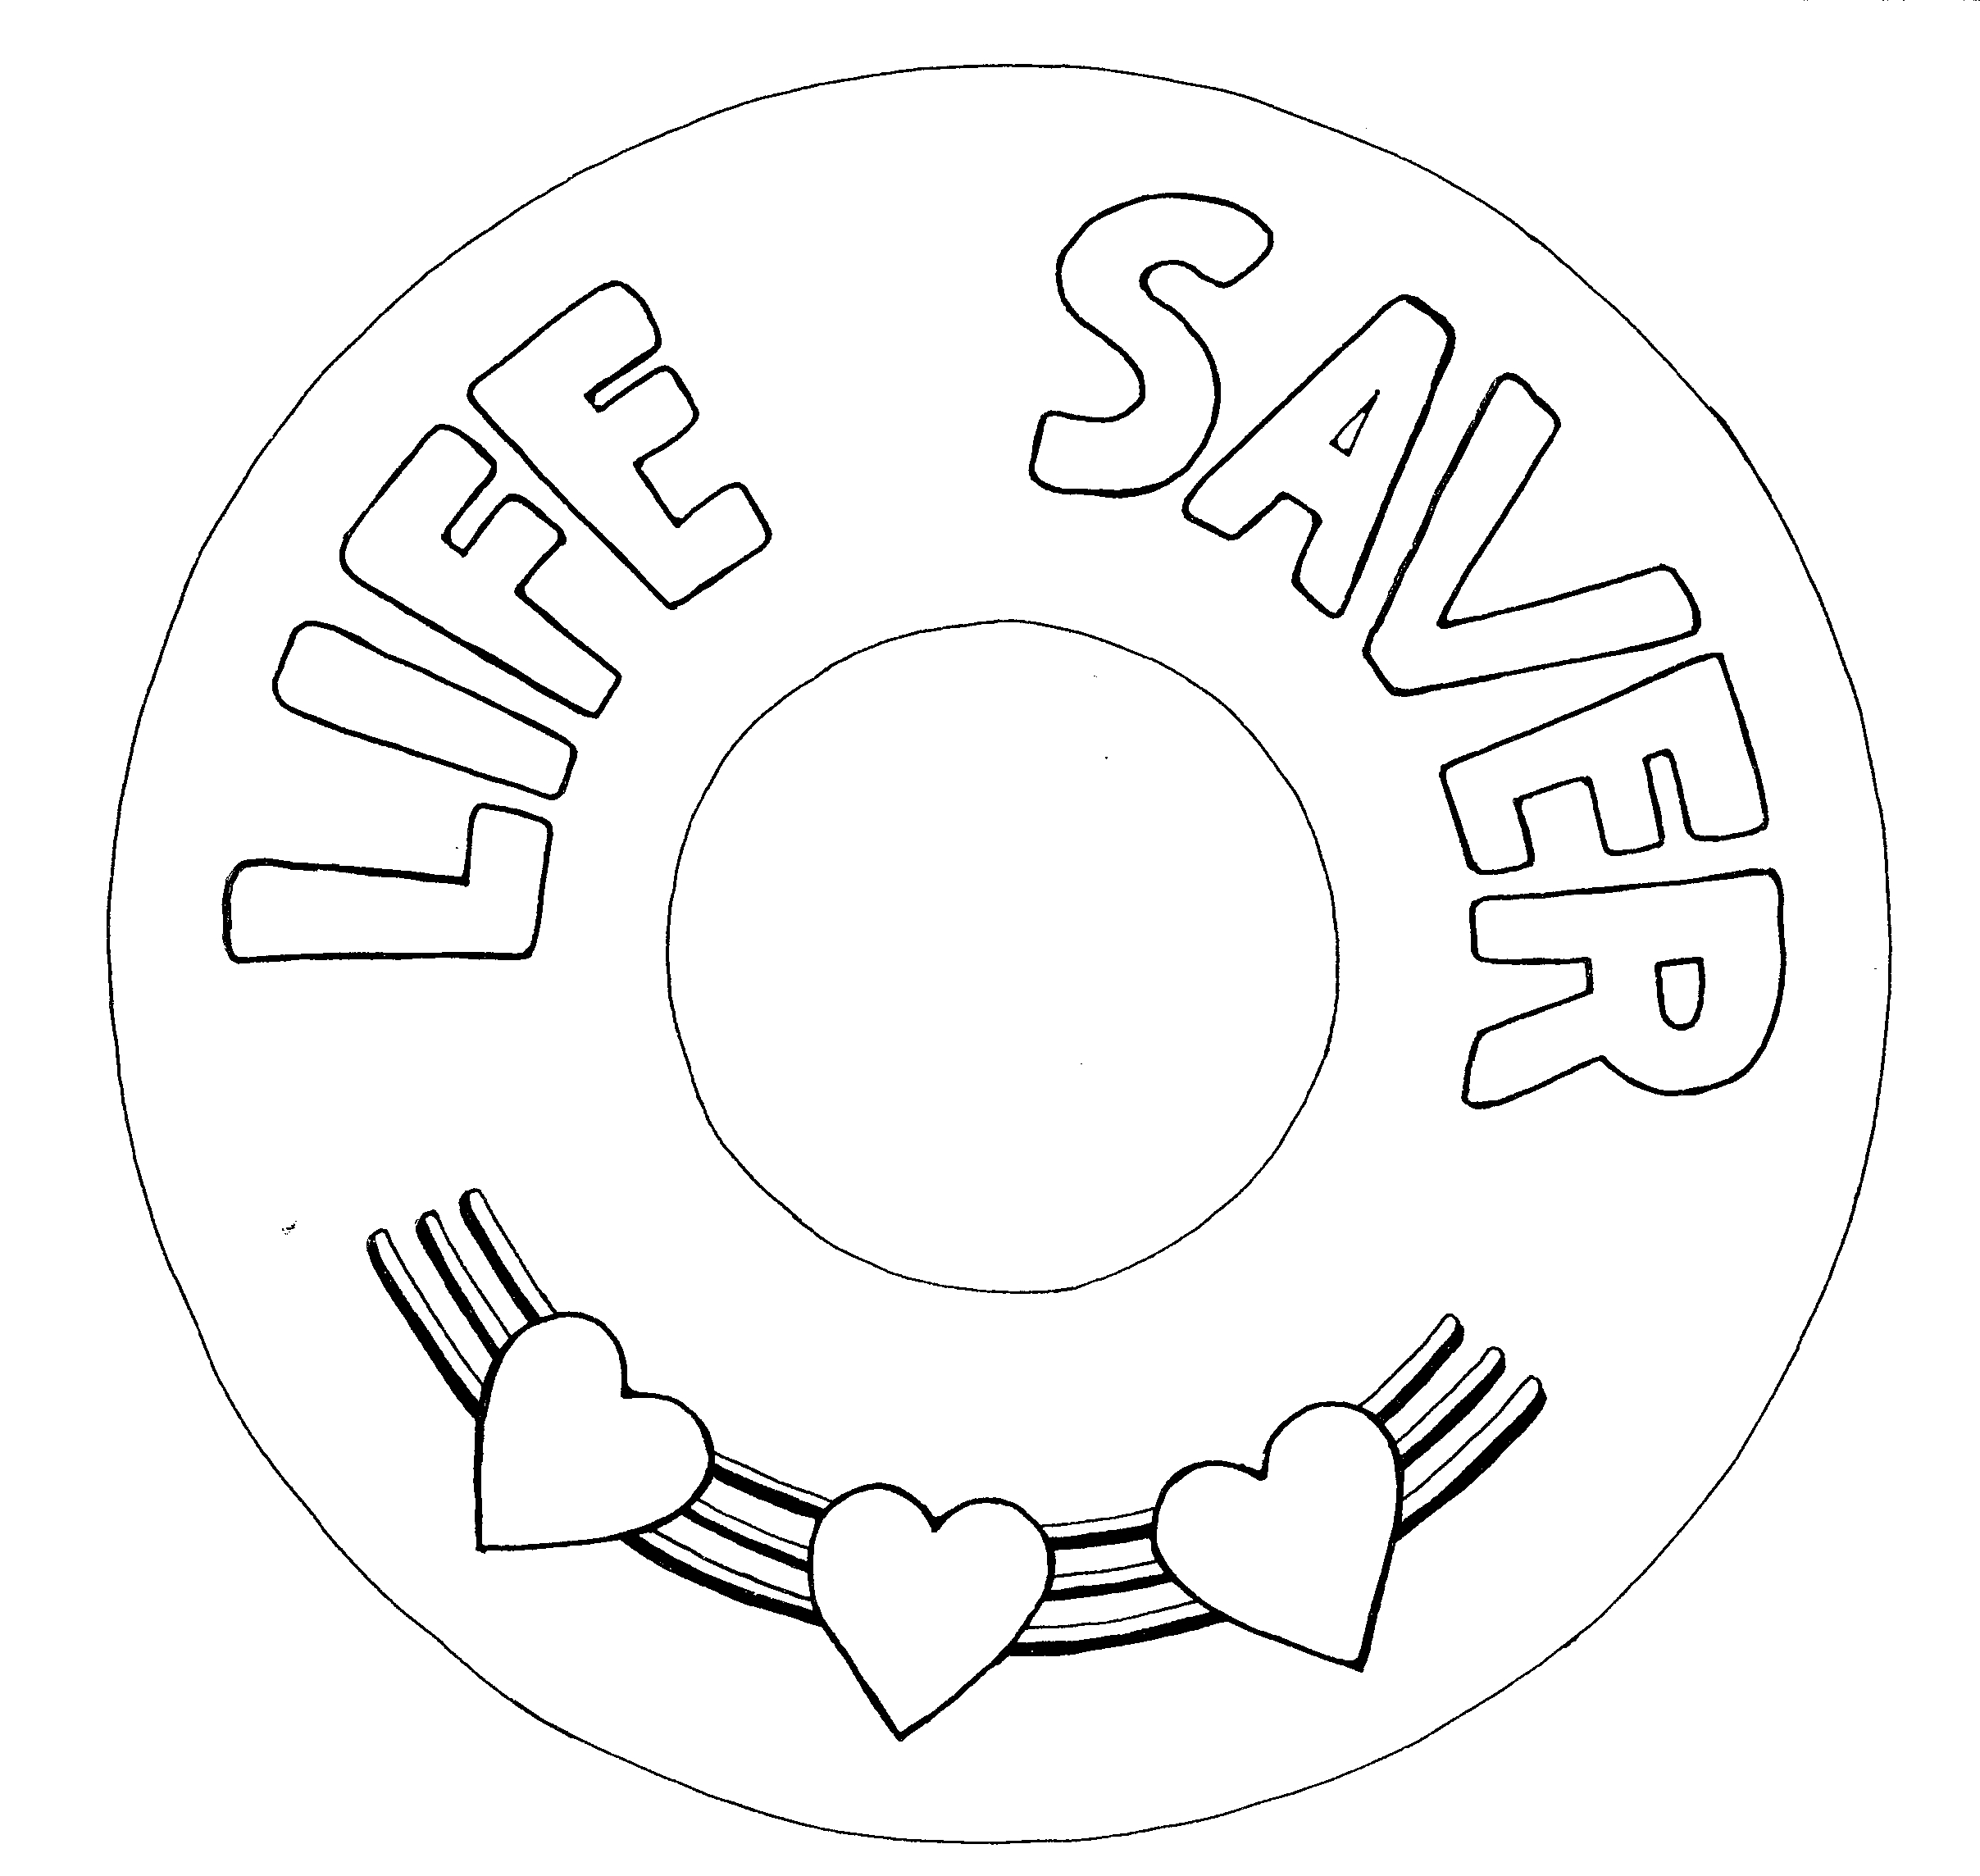 free clipart lifesaver candy